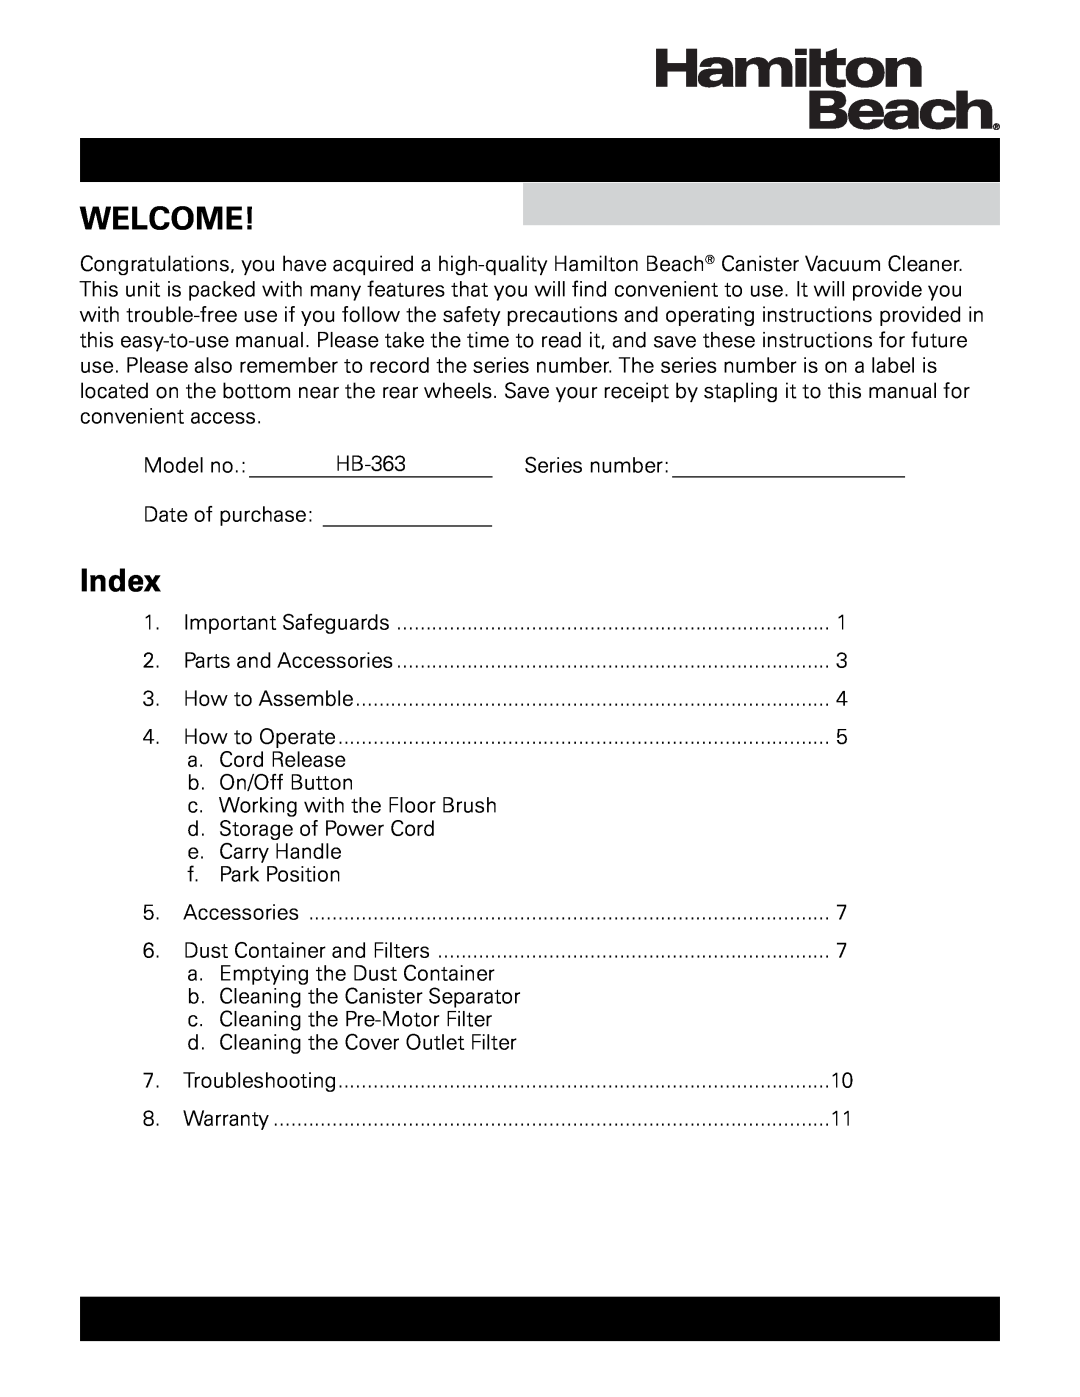 Hamilton Beach HB-363 owner manual Welcome, Index 